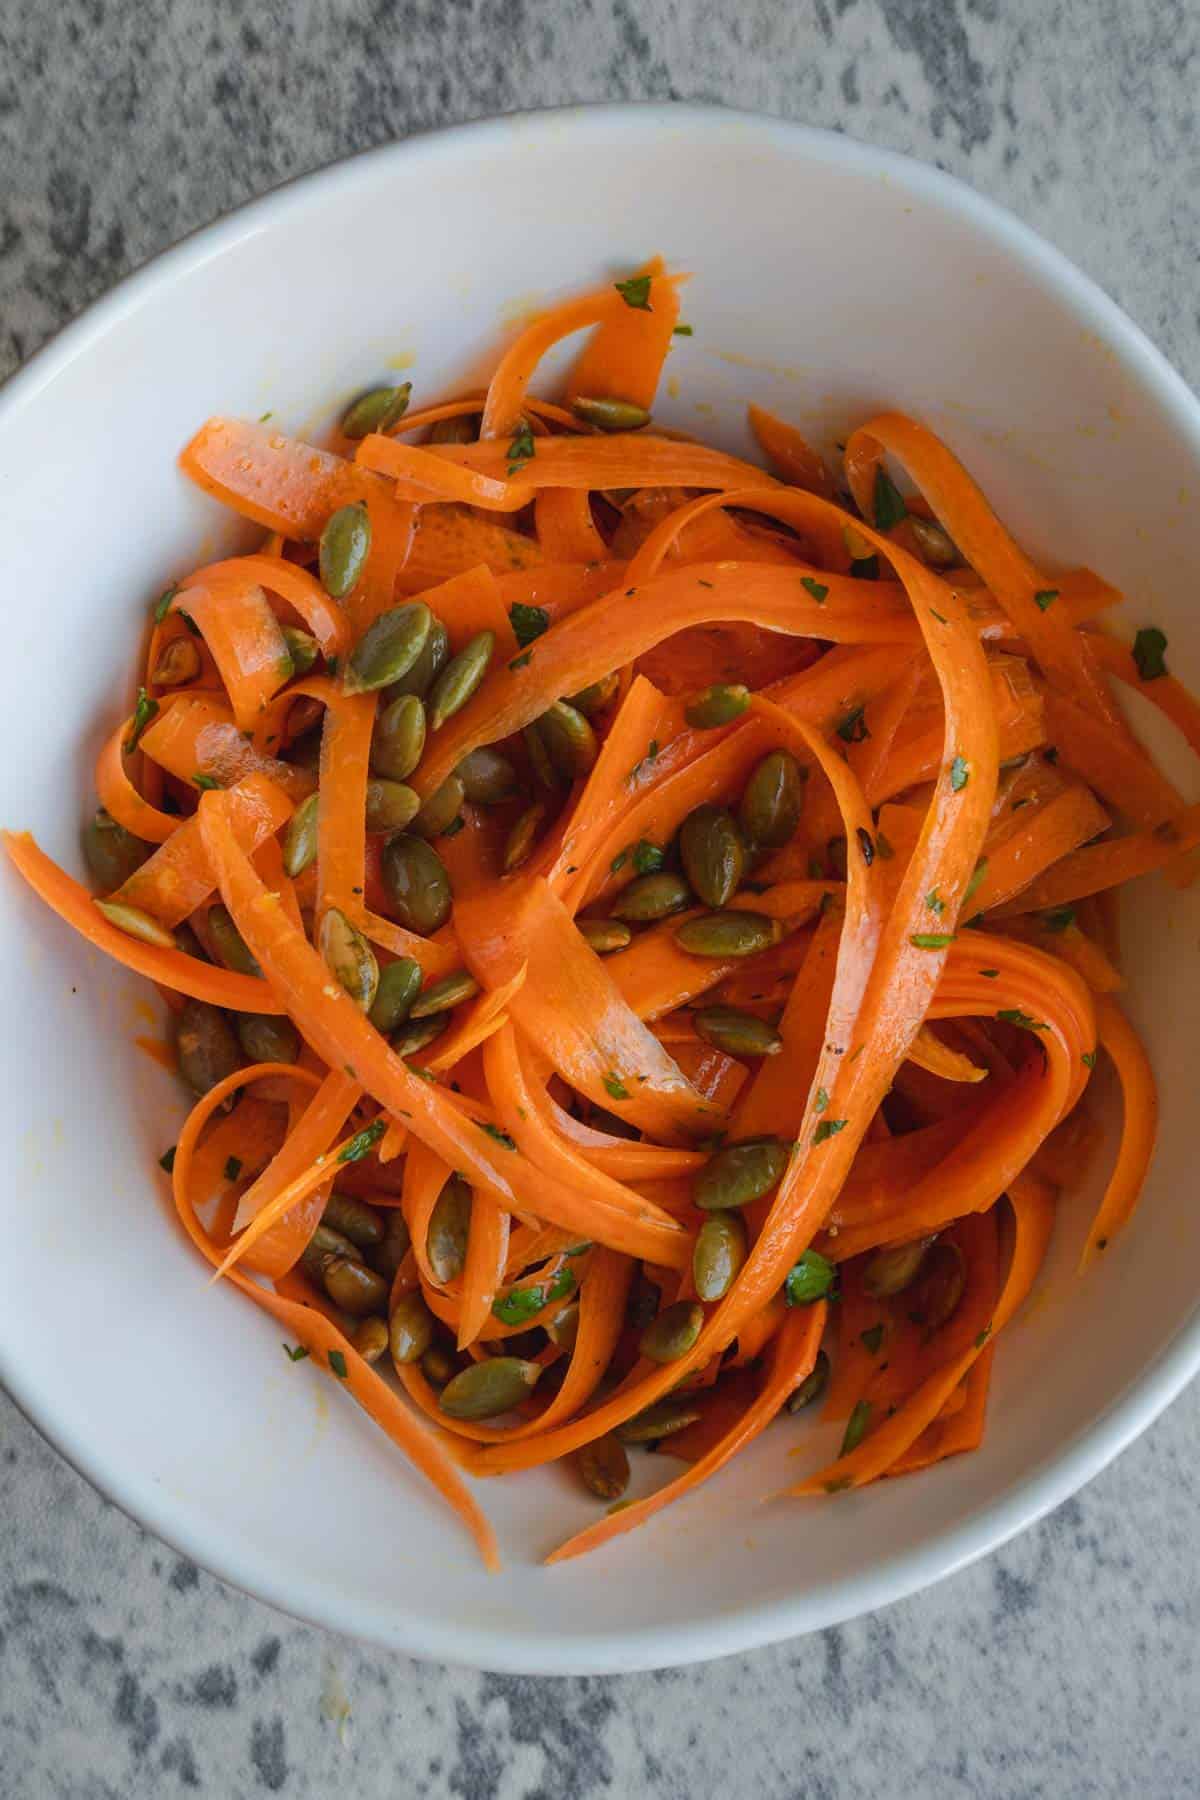 Raw carrot salad in a white bowl with roasted pepitas, chopped herbs and dressing.